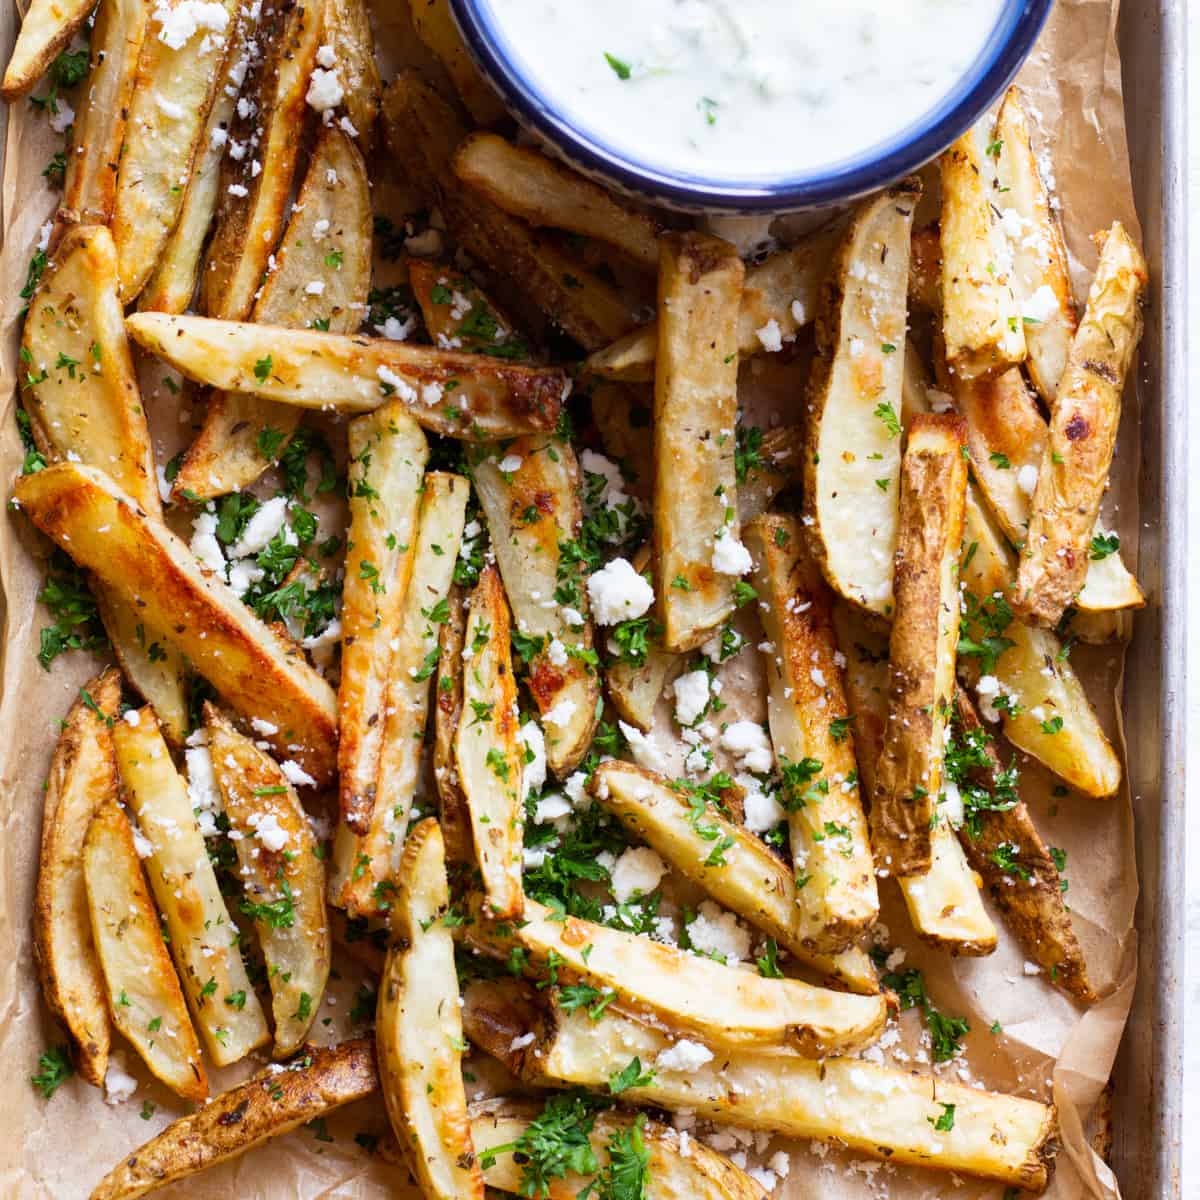 These Greek oven baked fries are crispy on the outside and tender on the inside. They're topped with feta and served with homemade tzatziki.
